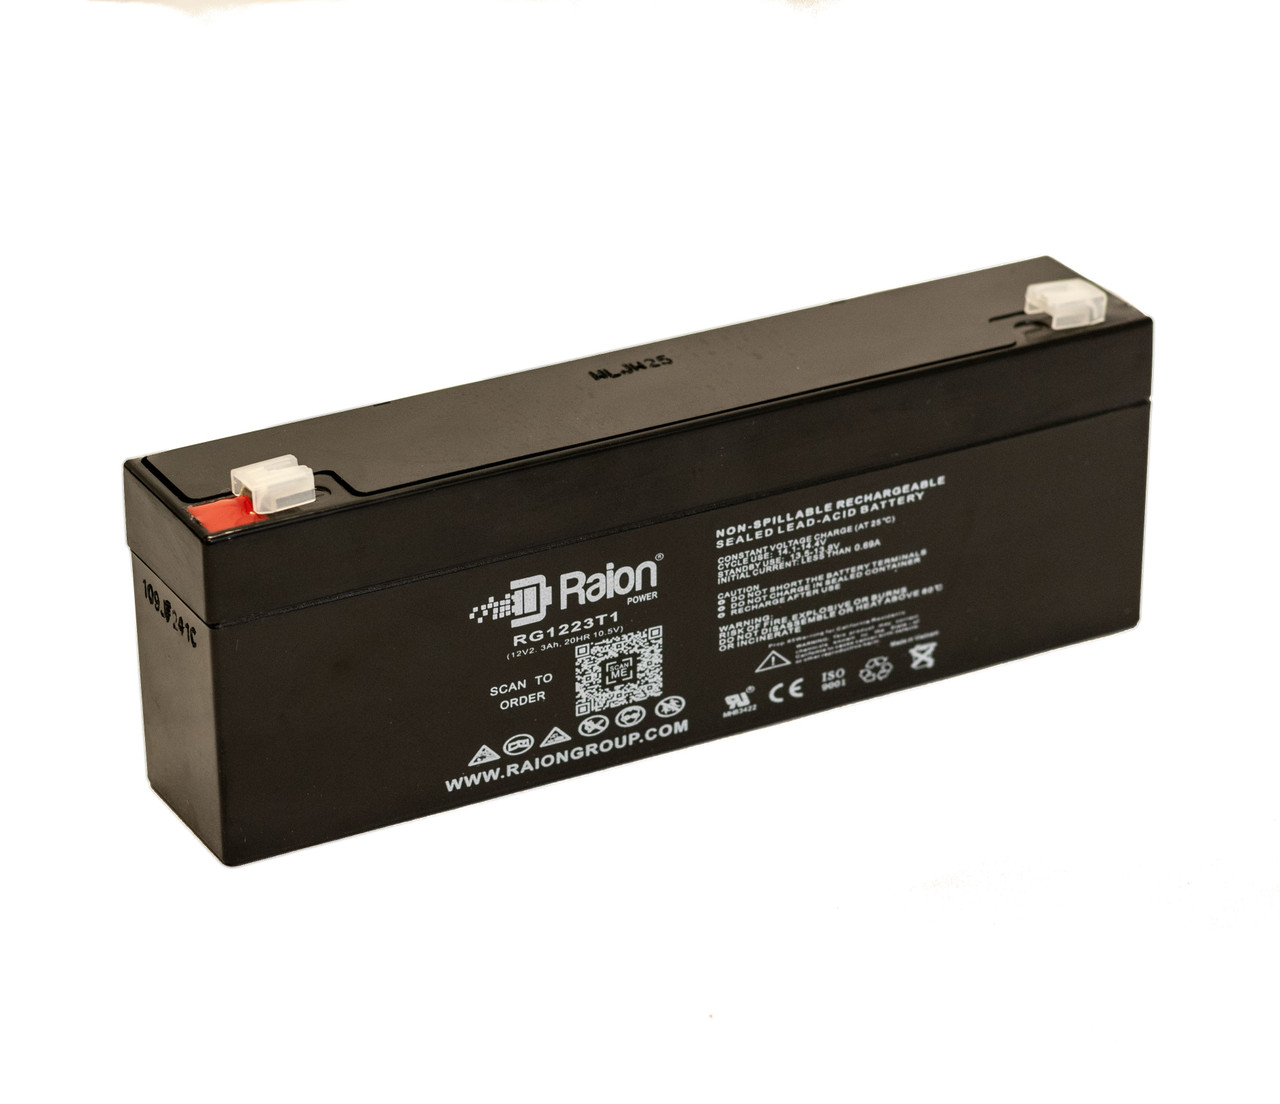 Raion Power RG1223T1 Replacement Battery for Johnson Control JC1219